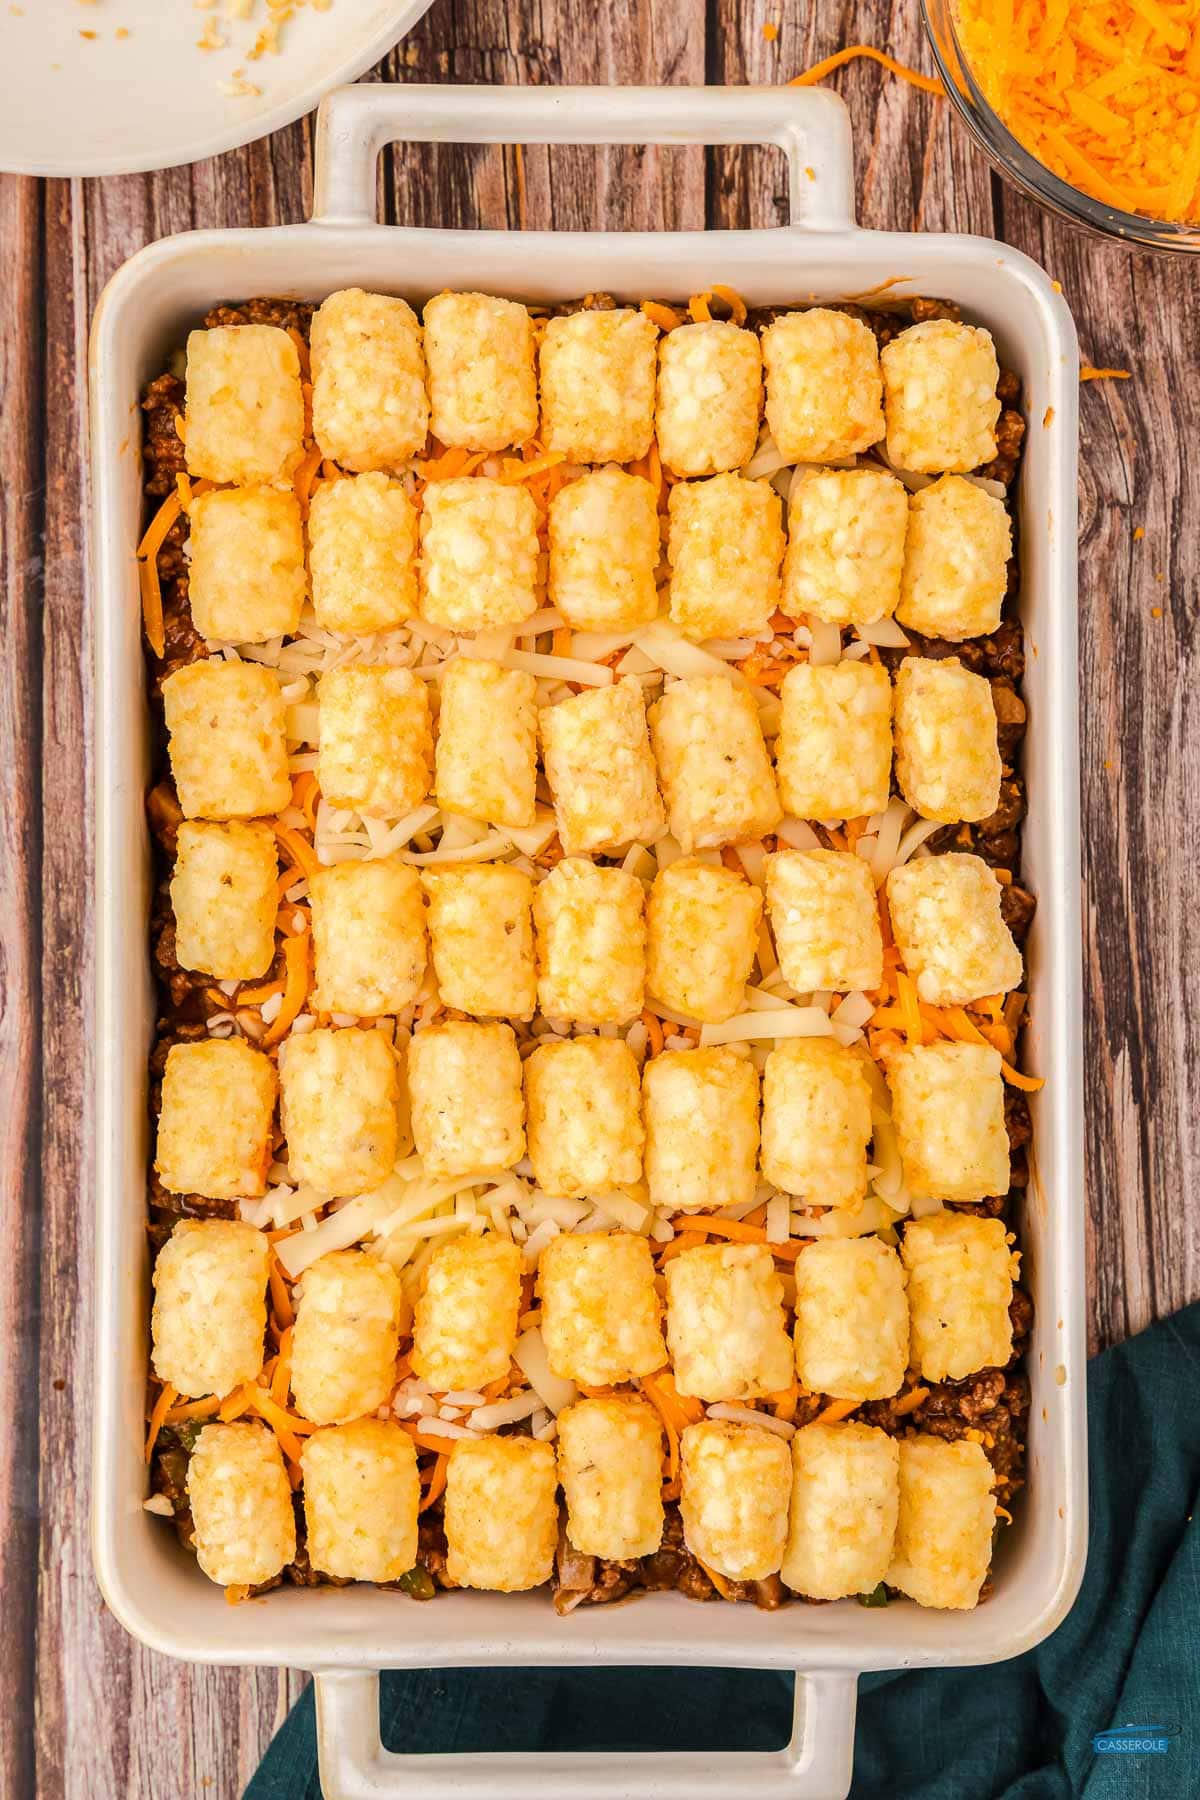 top with remaining cheese and tots